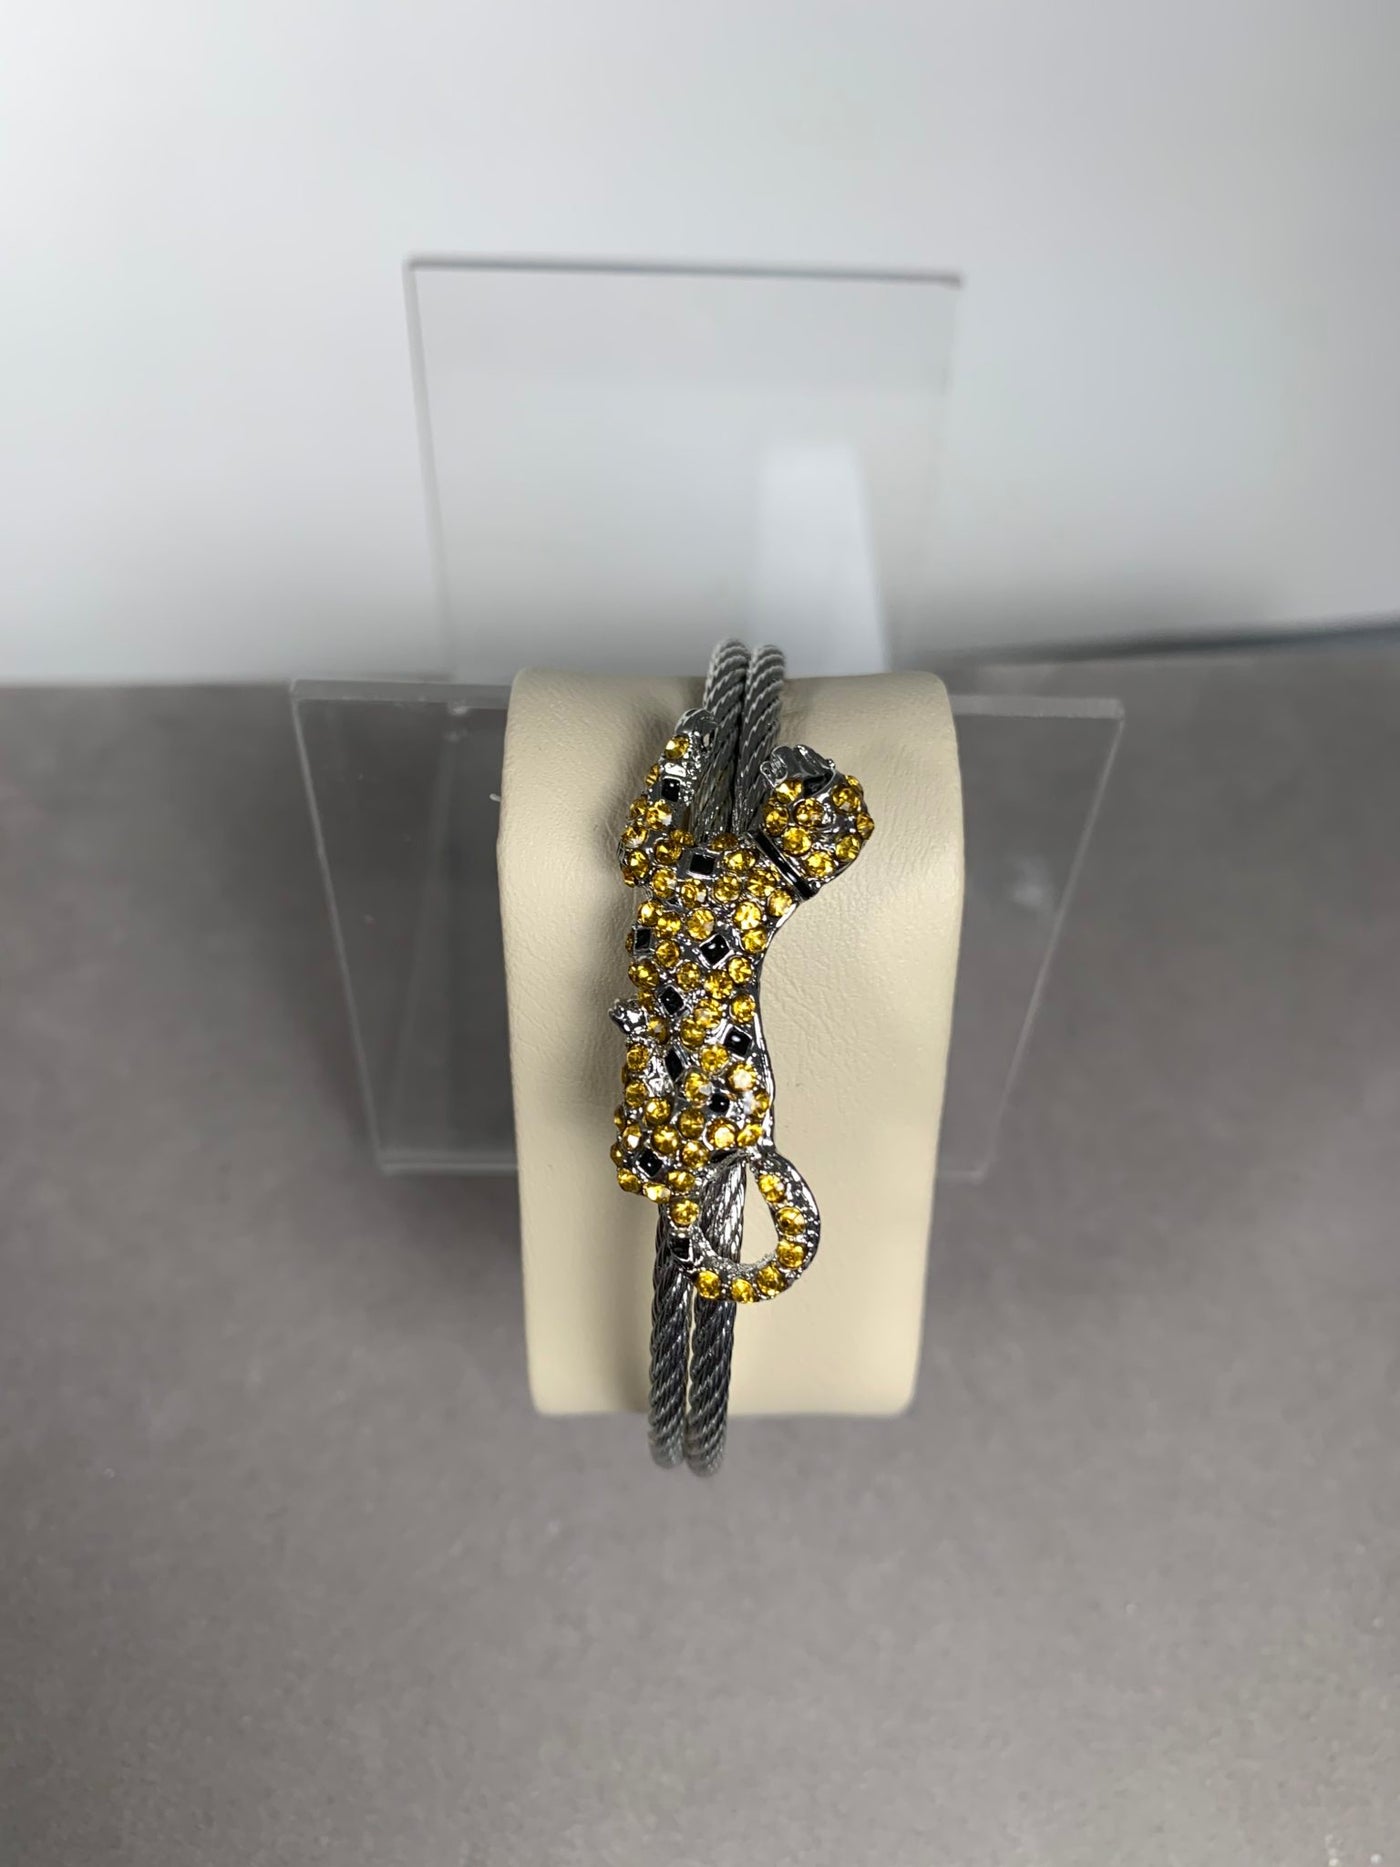 Silver Tone Double Wire Bangle Cuff with a Yellow Crystal Leopard